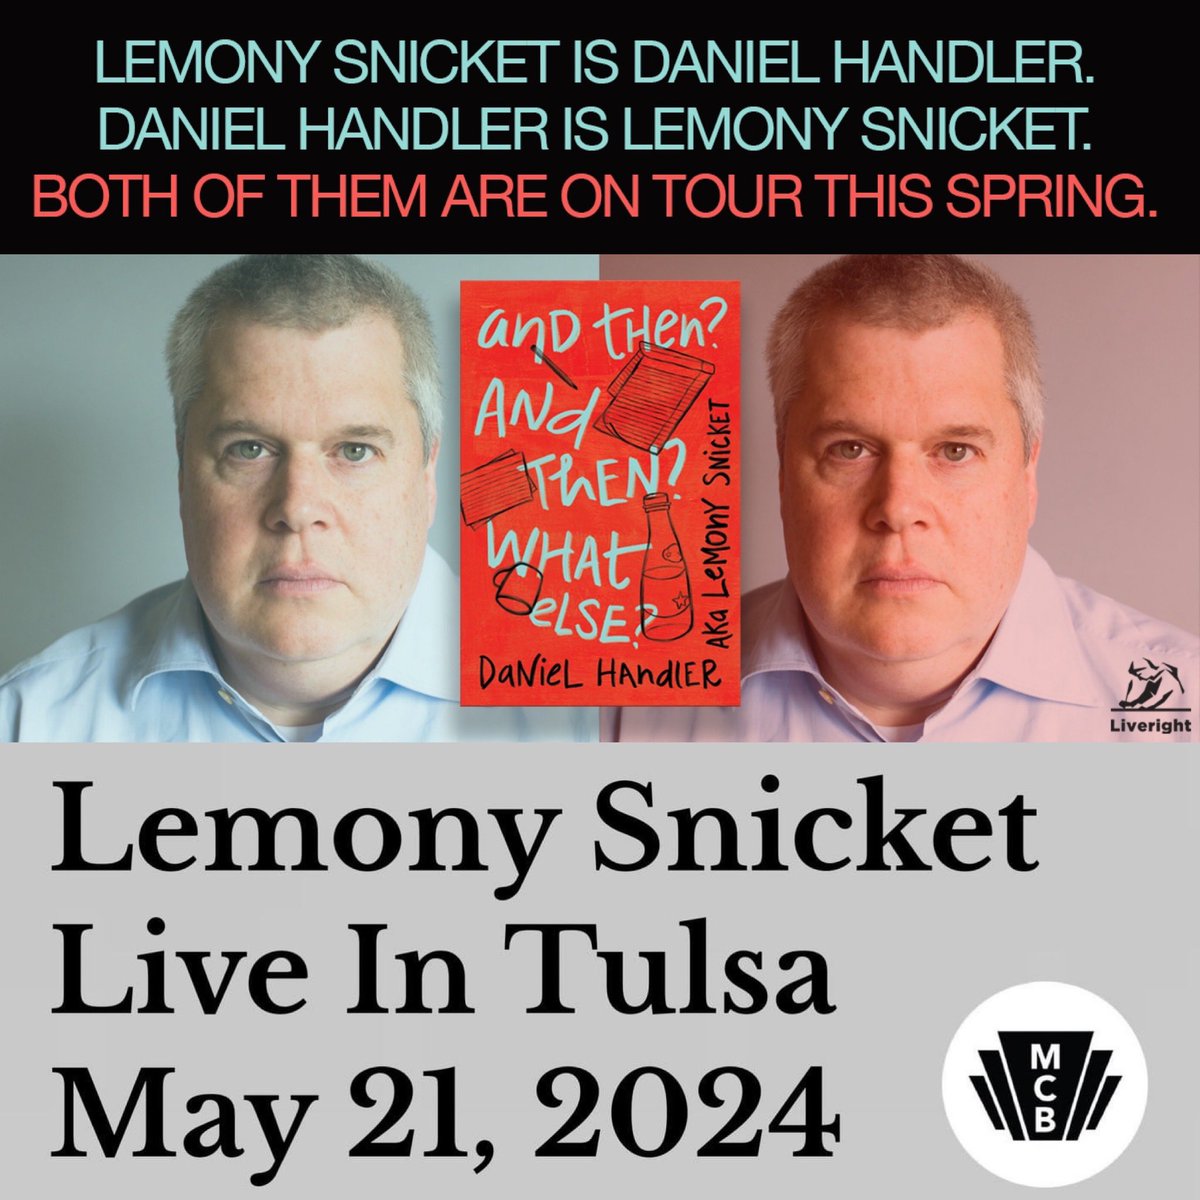 Got your SNICKET TICKETS?! Don’t miss this tomorrow 5/21. 7pm. @Tulsagogue magiccitybooks.com